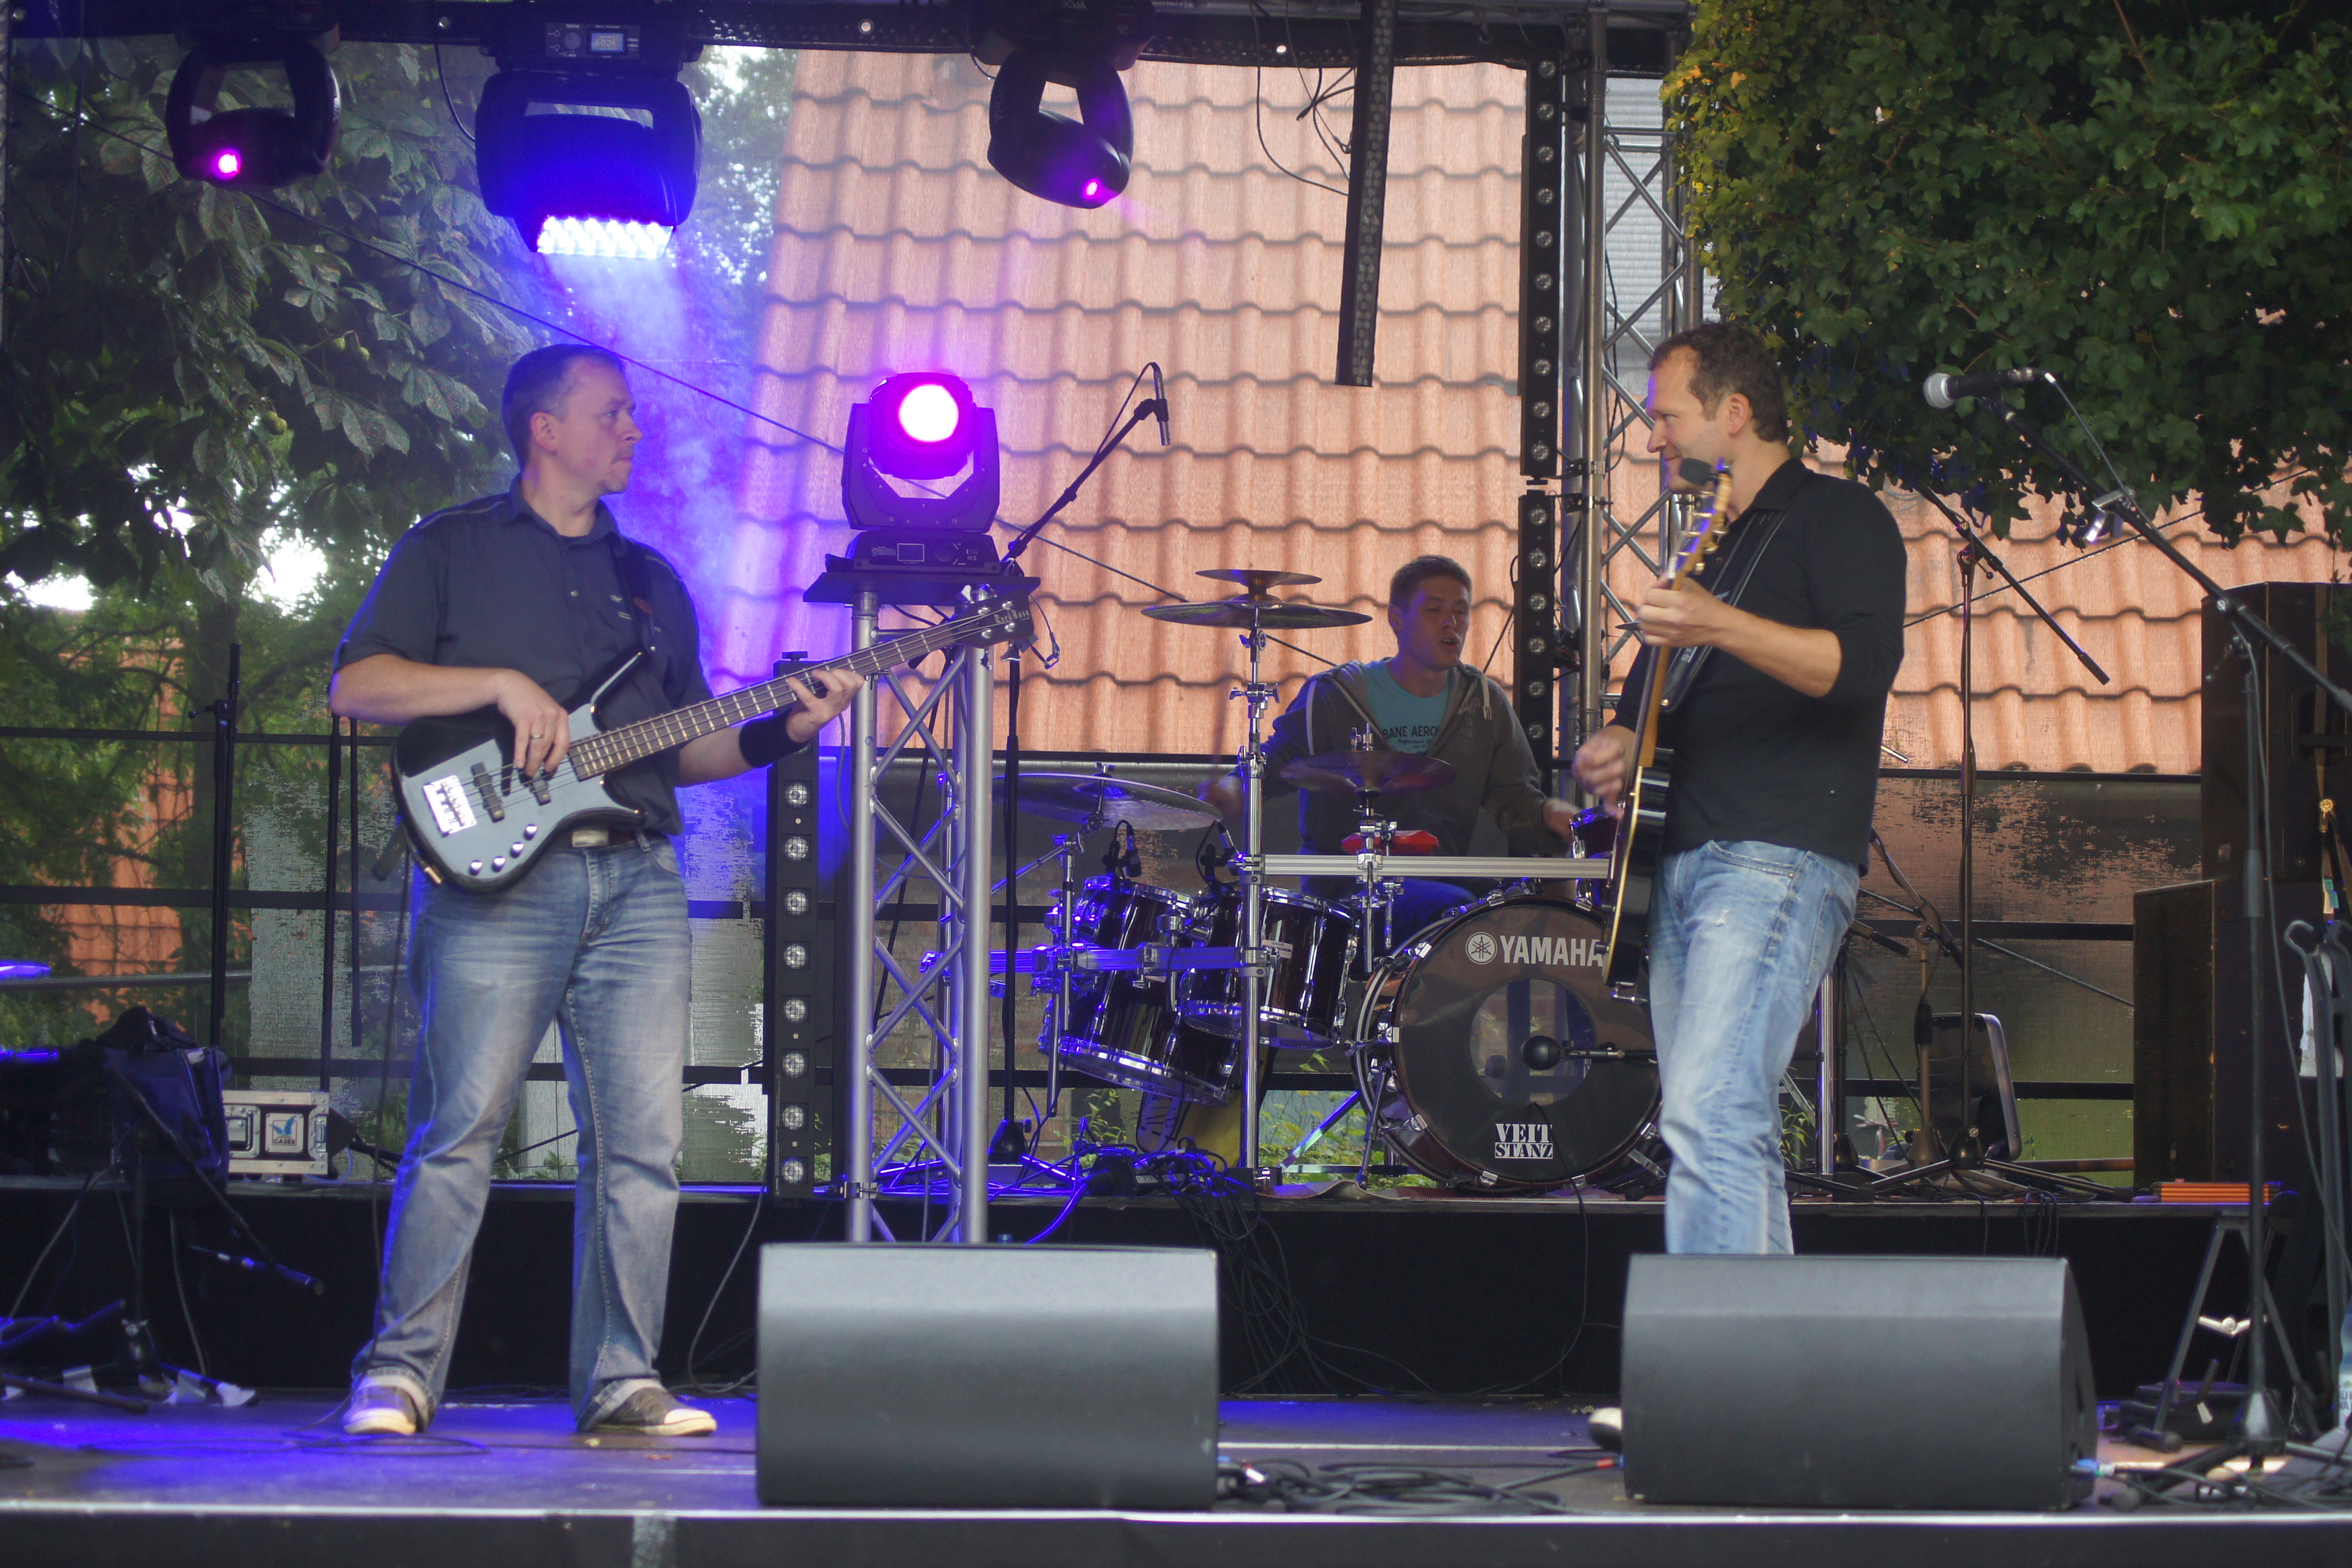 Stadtfest Gifhorn 21.8.2016